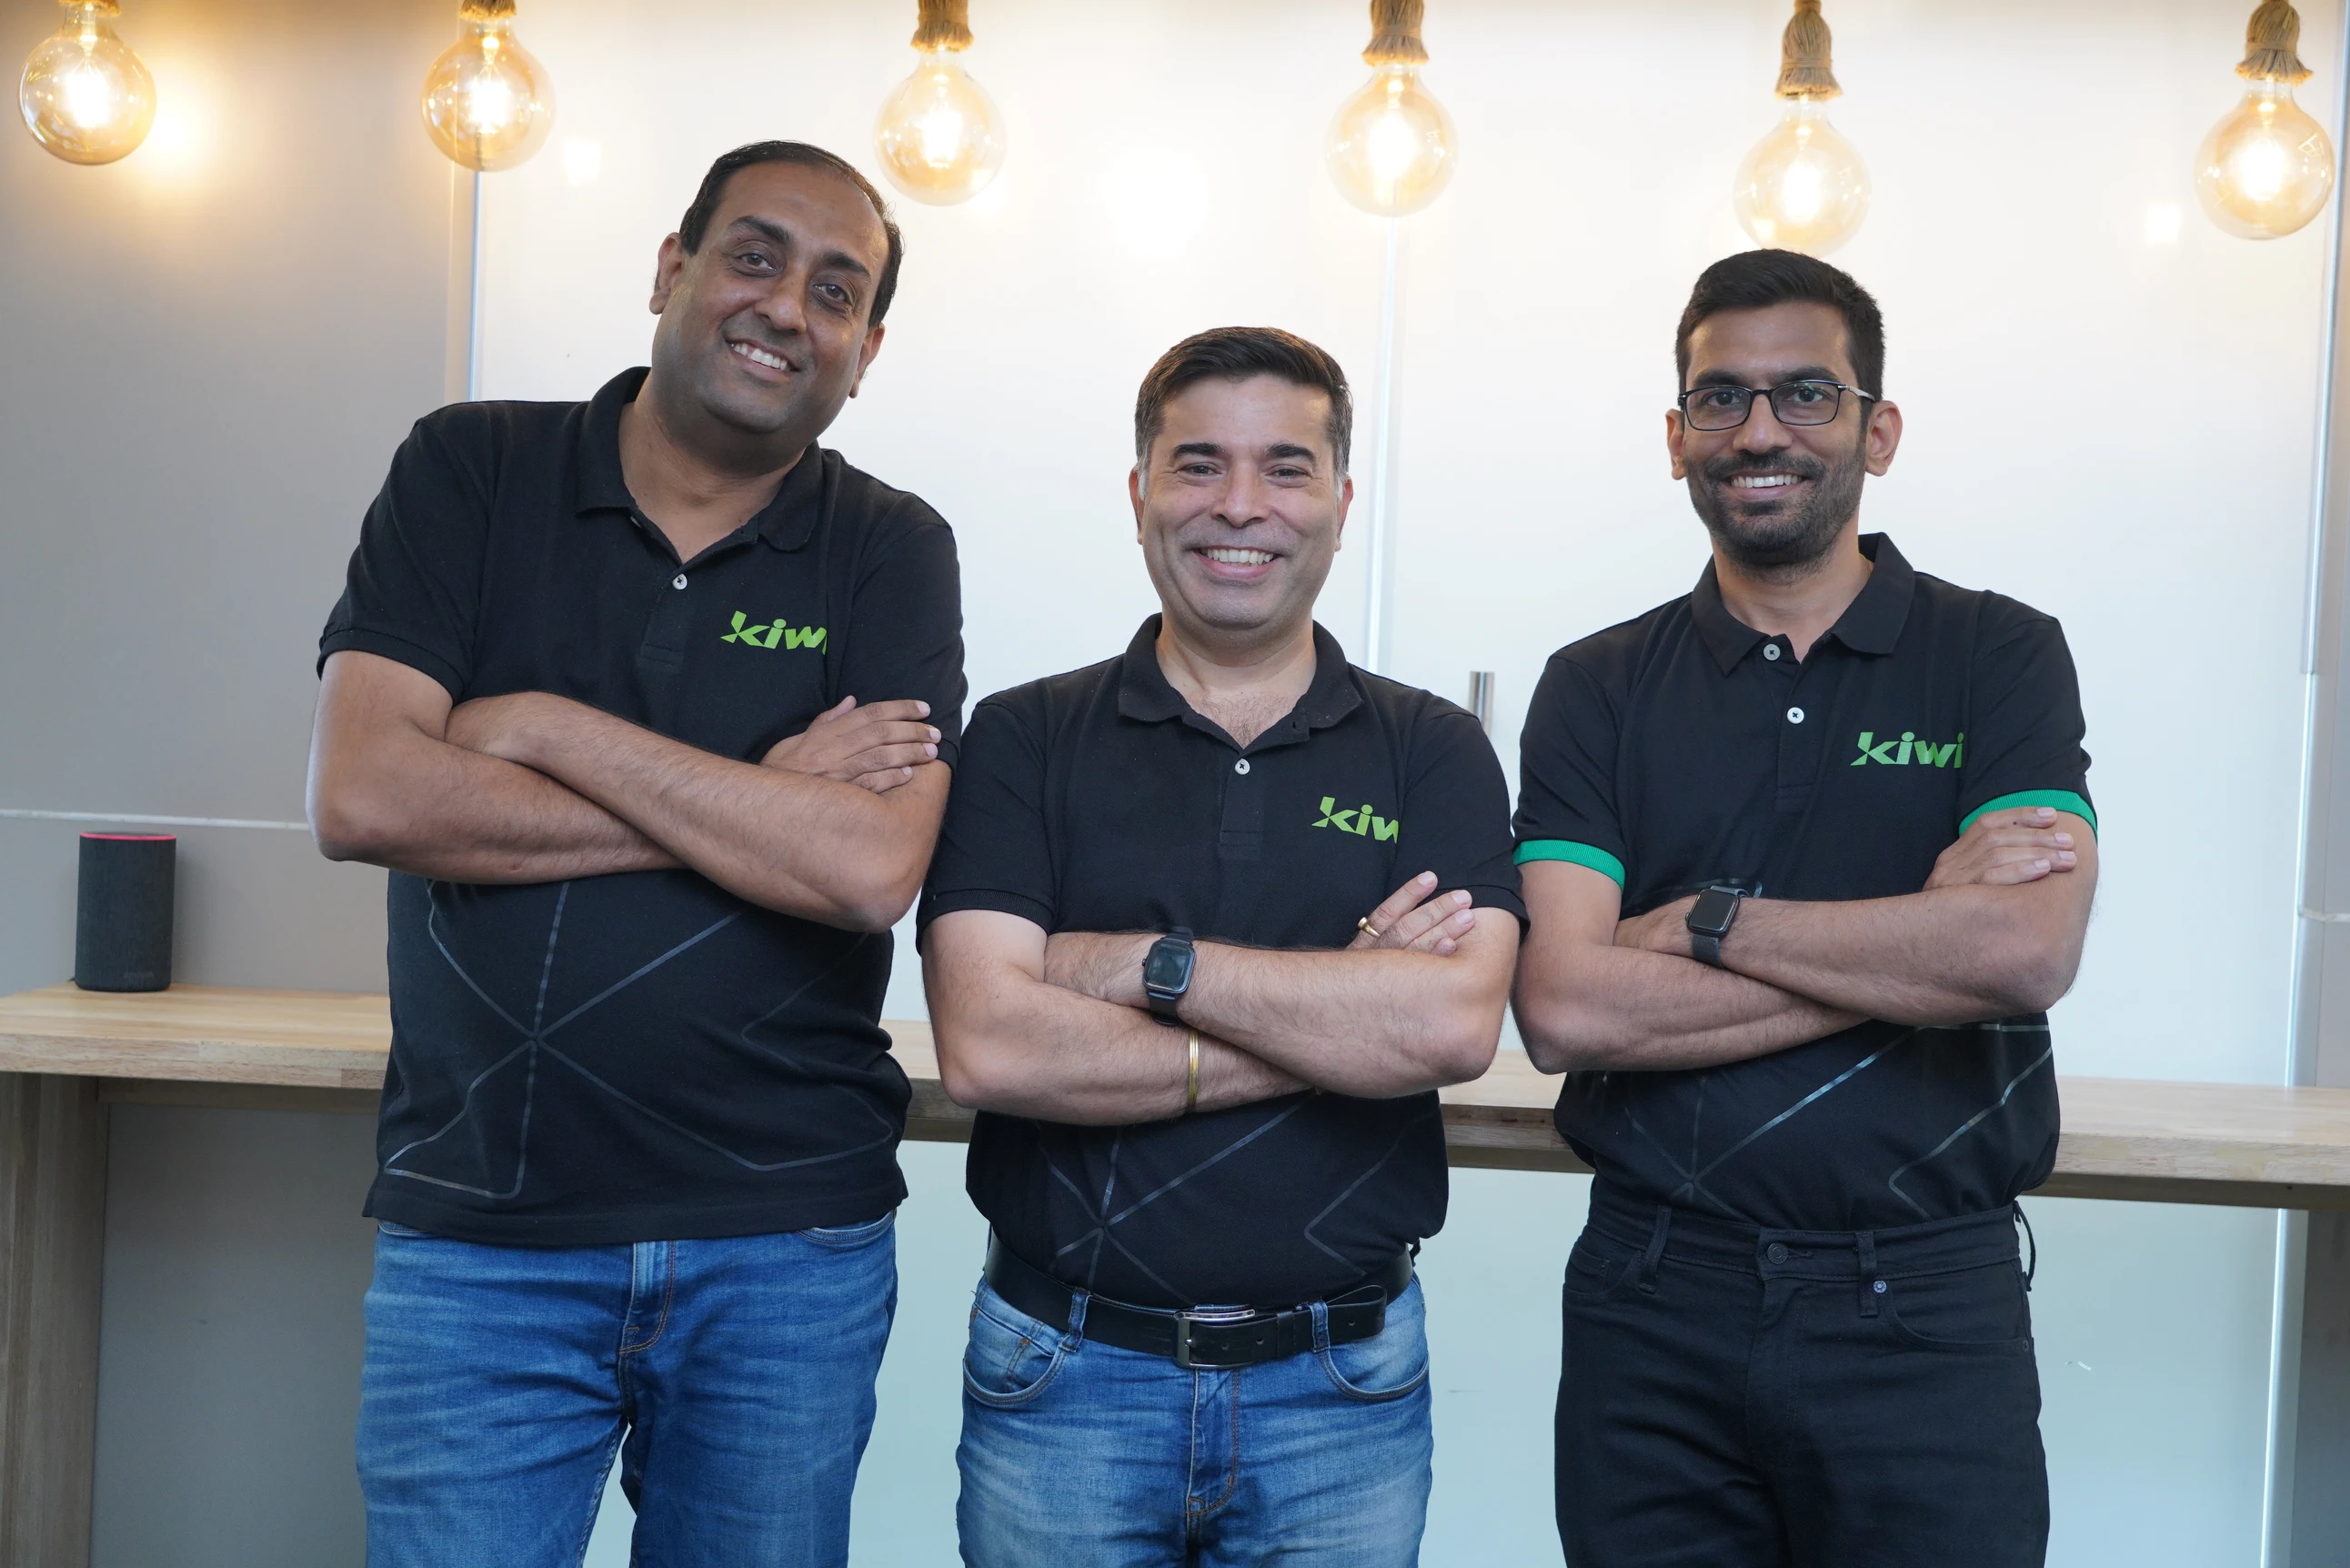 Kiwi co-founders (L-R) Siddharth Mehta, Mohit Bedi and Anup Agrawal